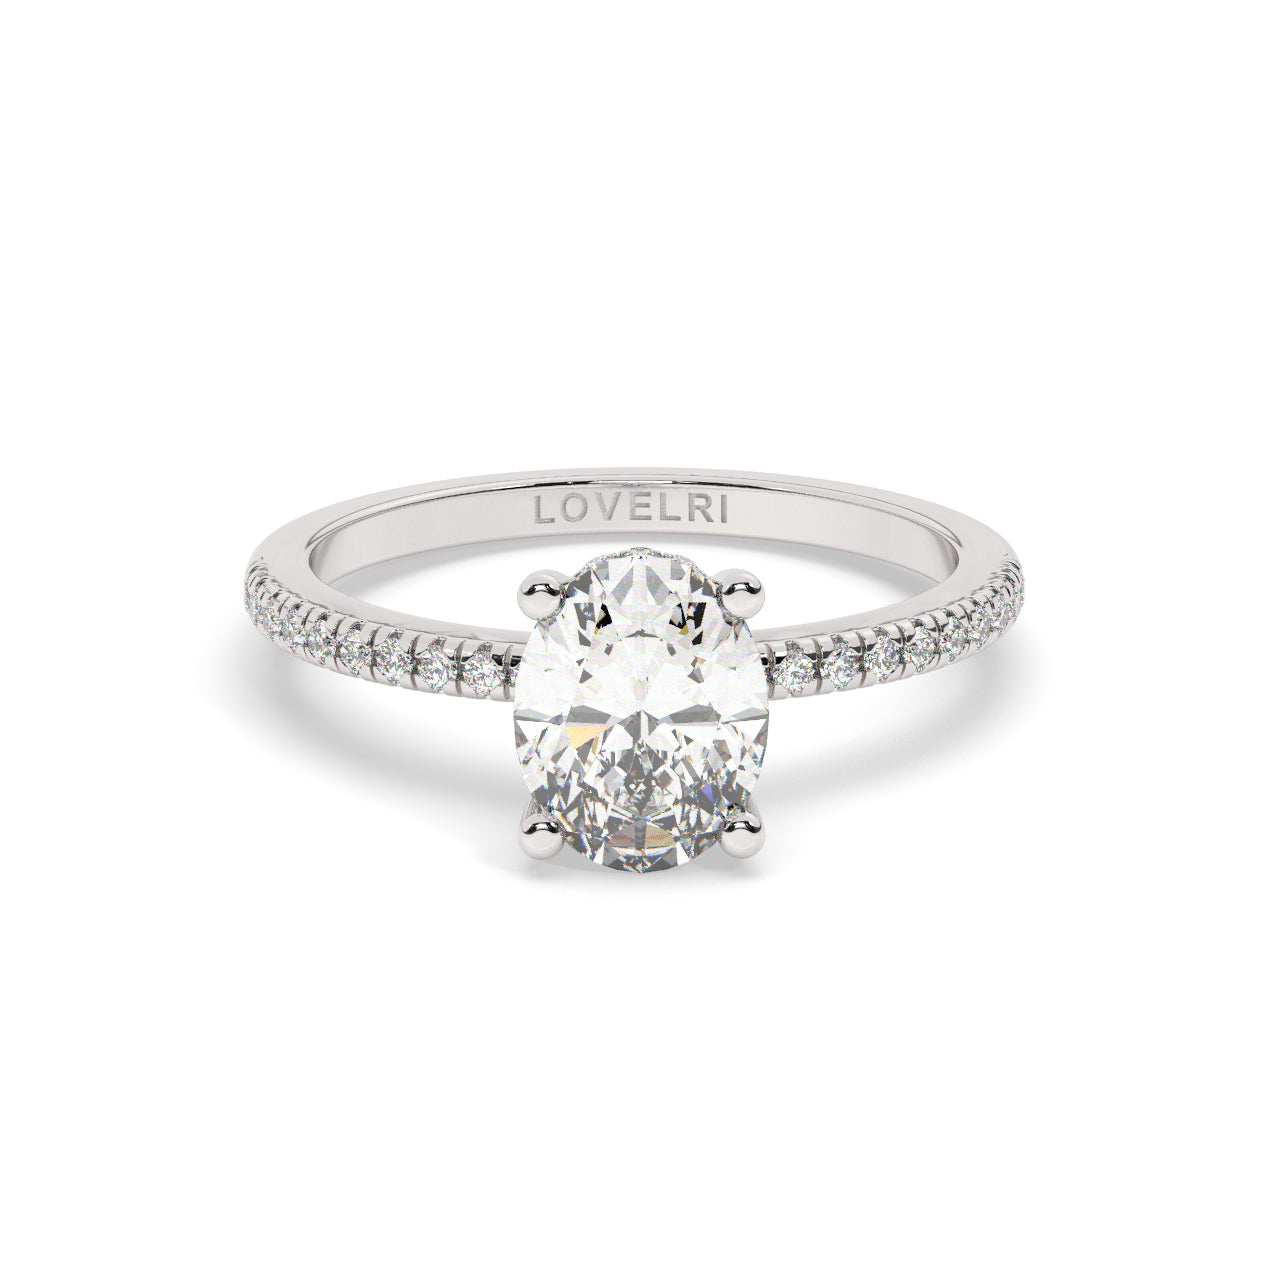 White gold oval diamond set with a hidden halo on a pave setting - front view